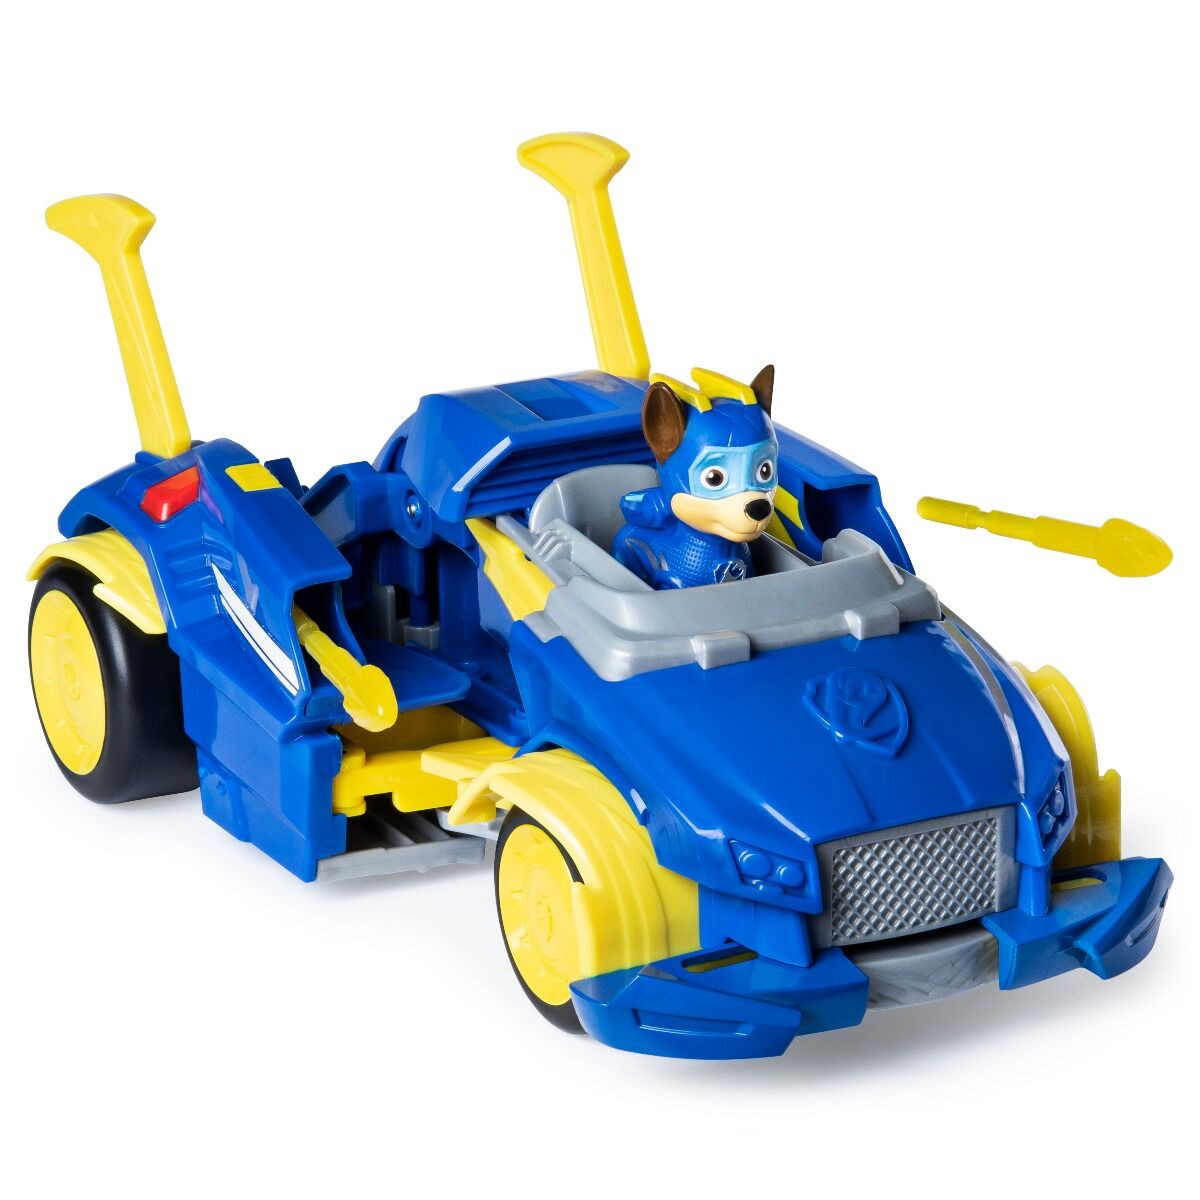 Paw patrol vehicul Chase